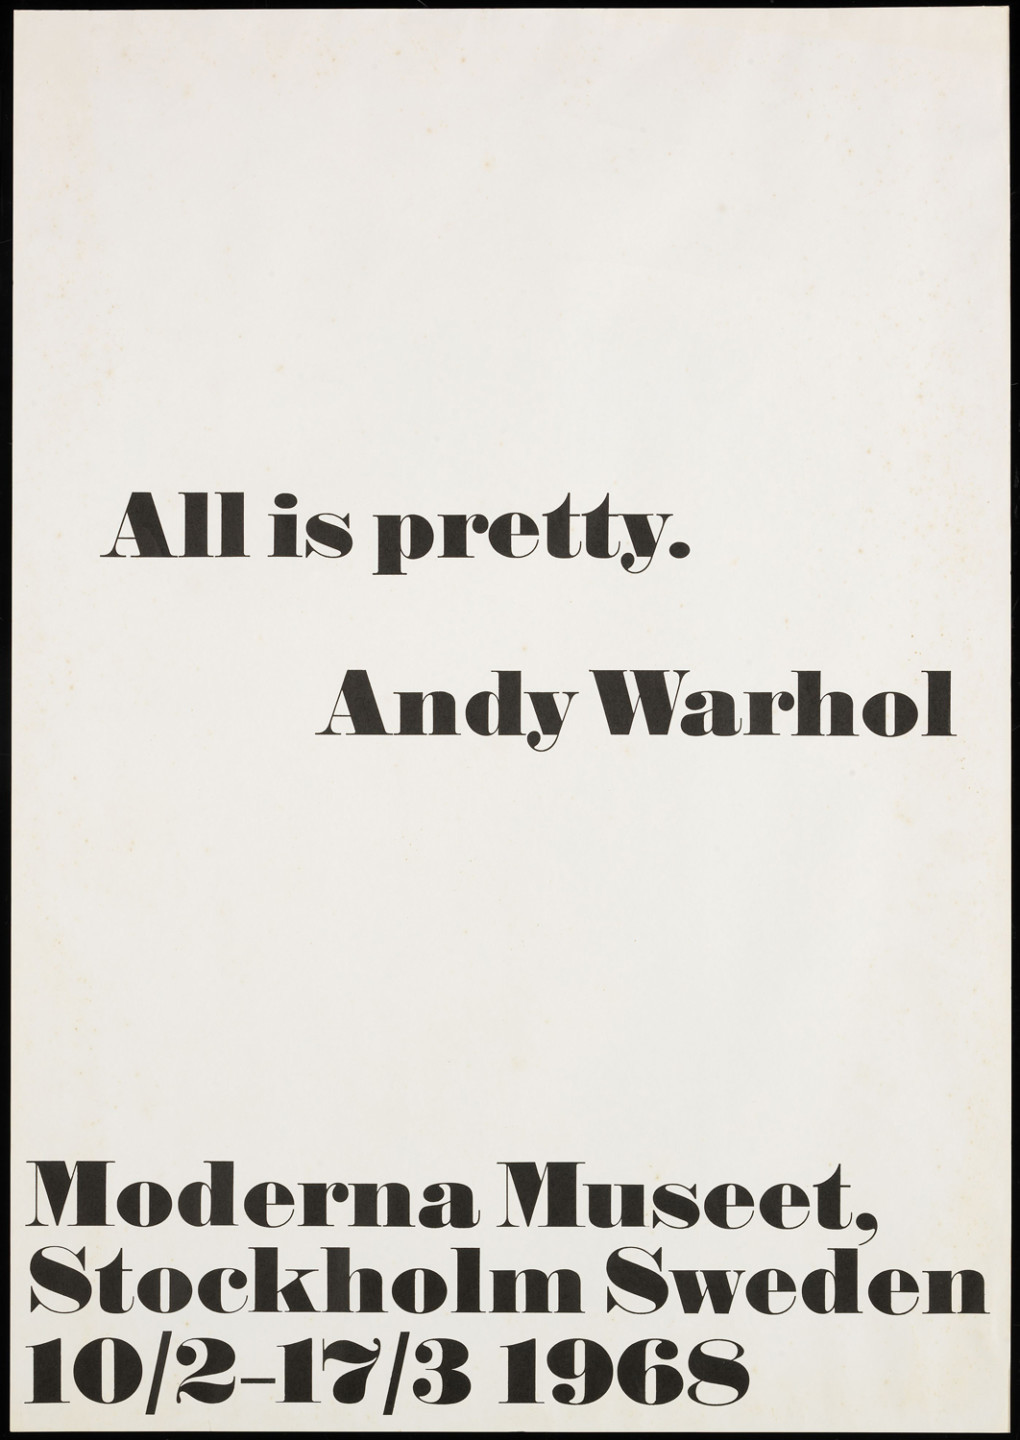 Text "All is pretty. Andy Warhol" in black on white background.